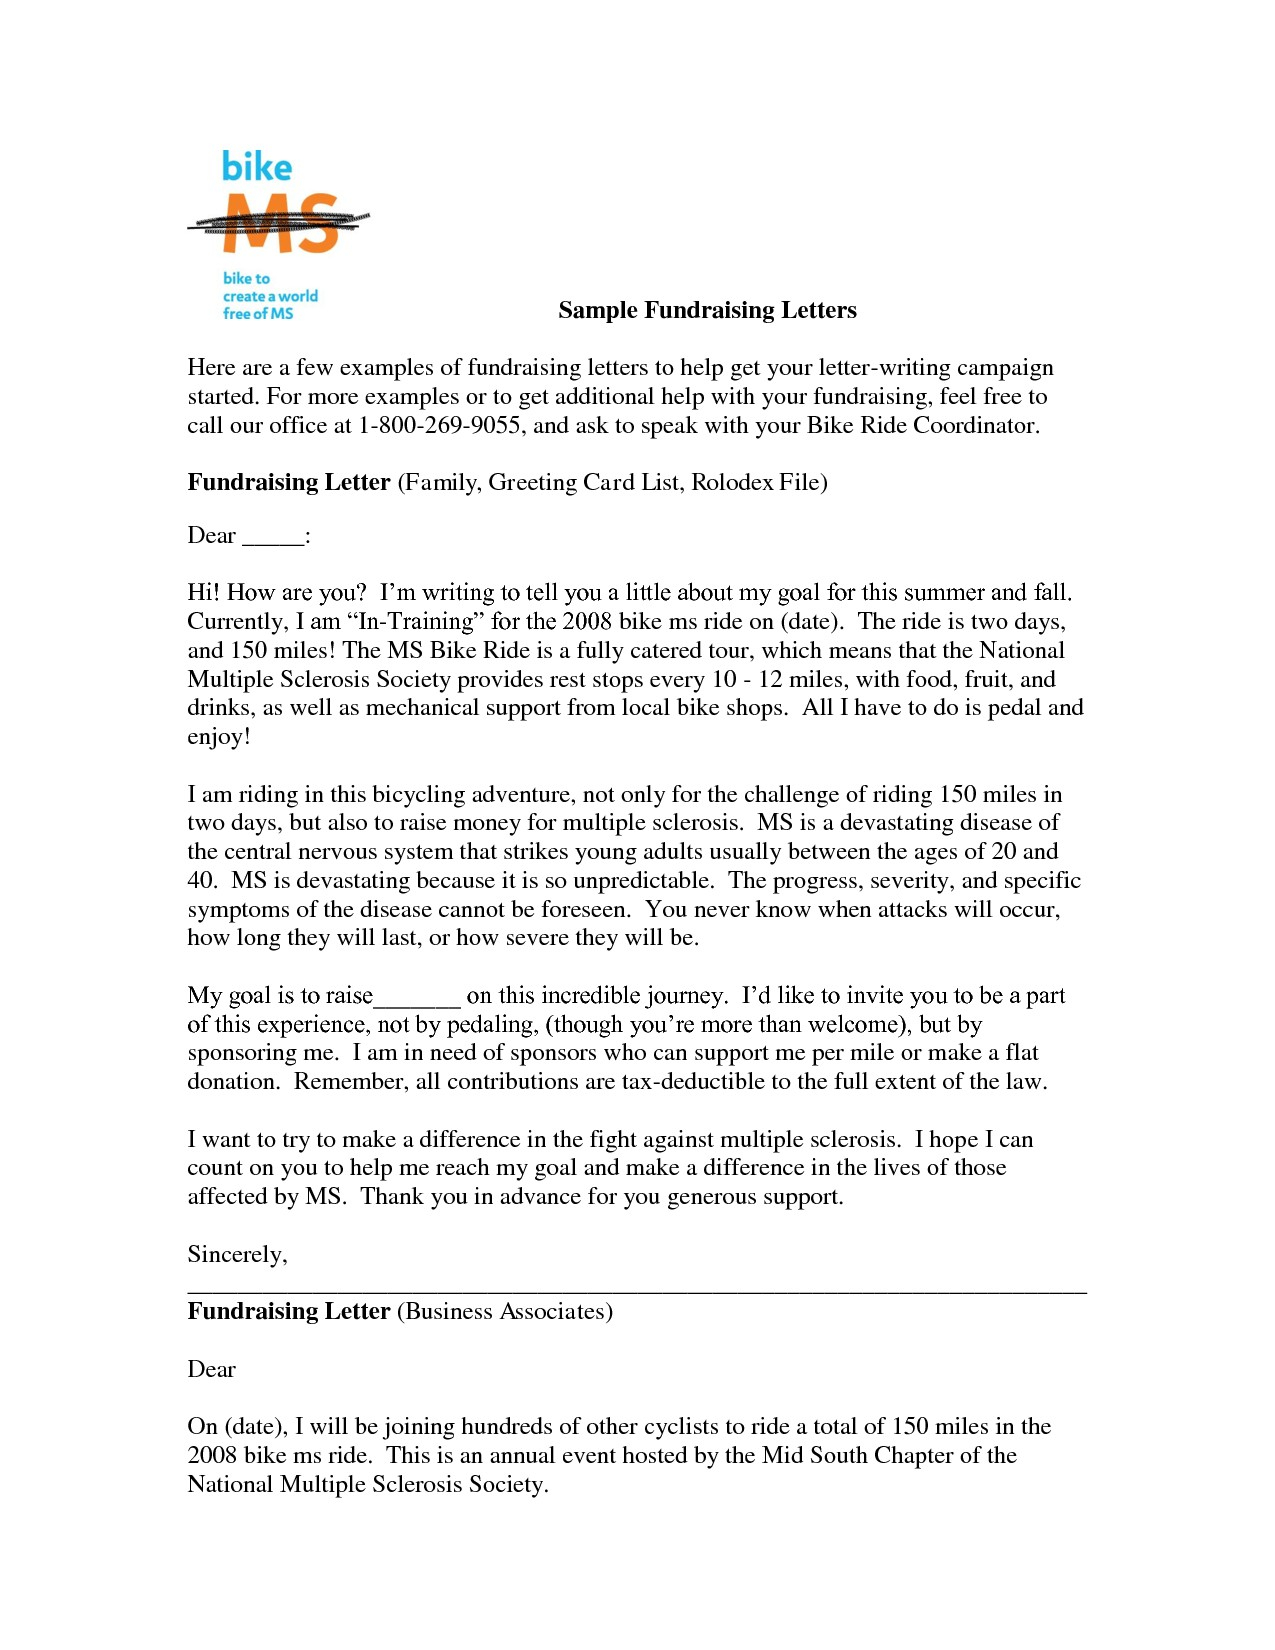 Fundraising Appeal Letter Template - Fundraising Appeal Letter format Best Sample Fundraising Letter